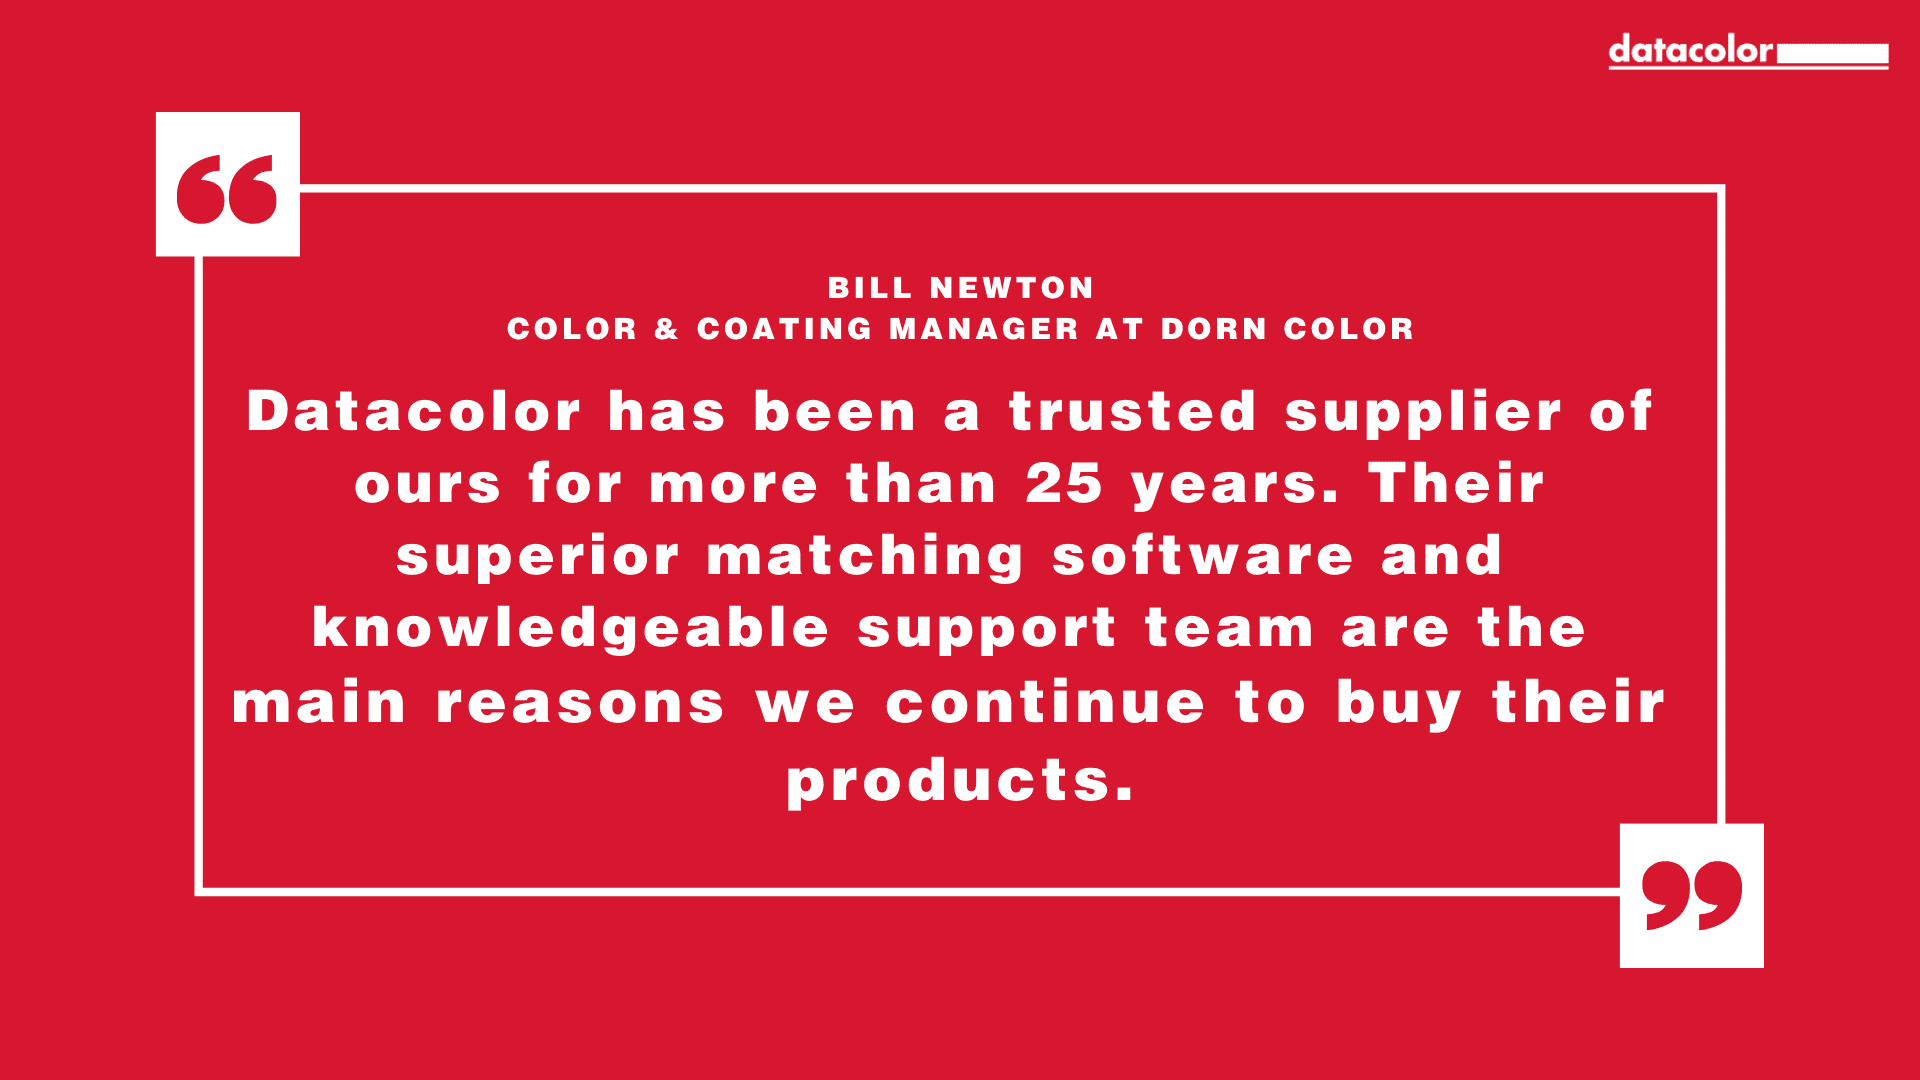 Quote from Bill Newton, Color and Coatings Manager at Dorn Color